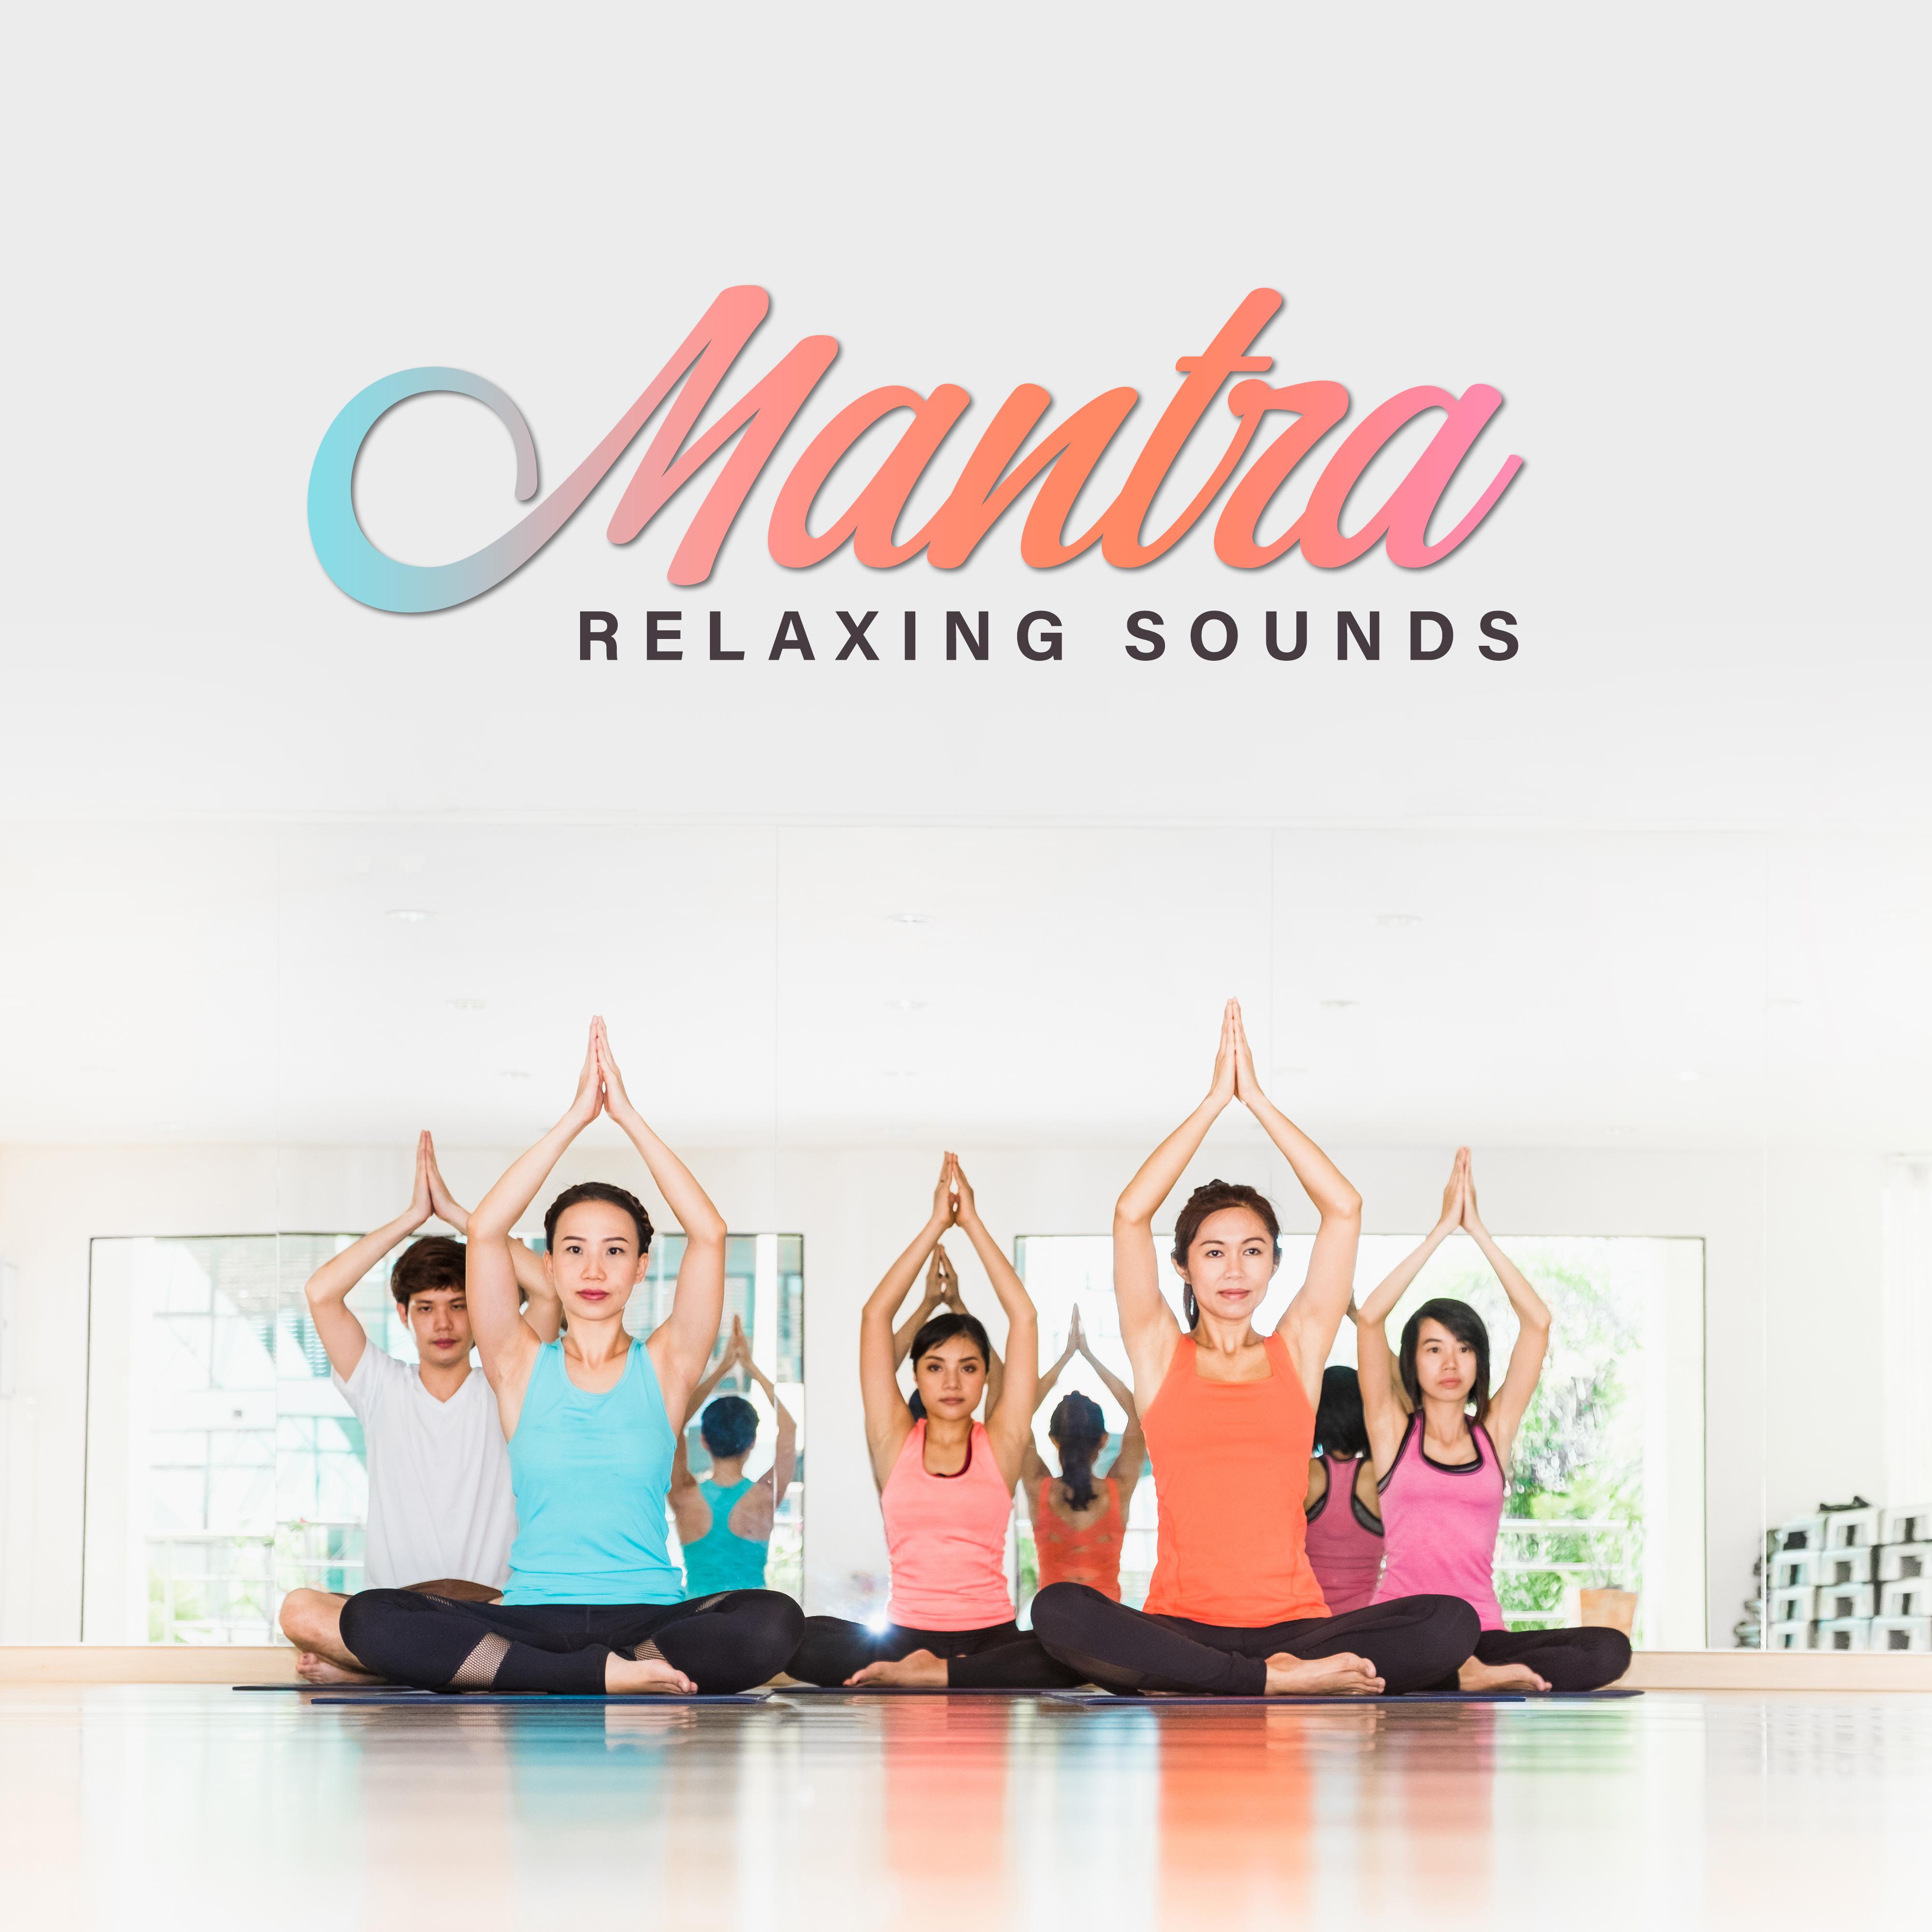 Mantra Relaxing Sounds